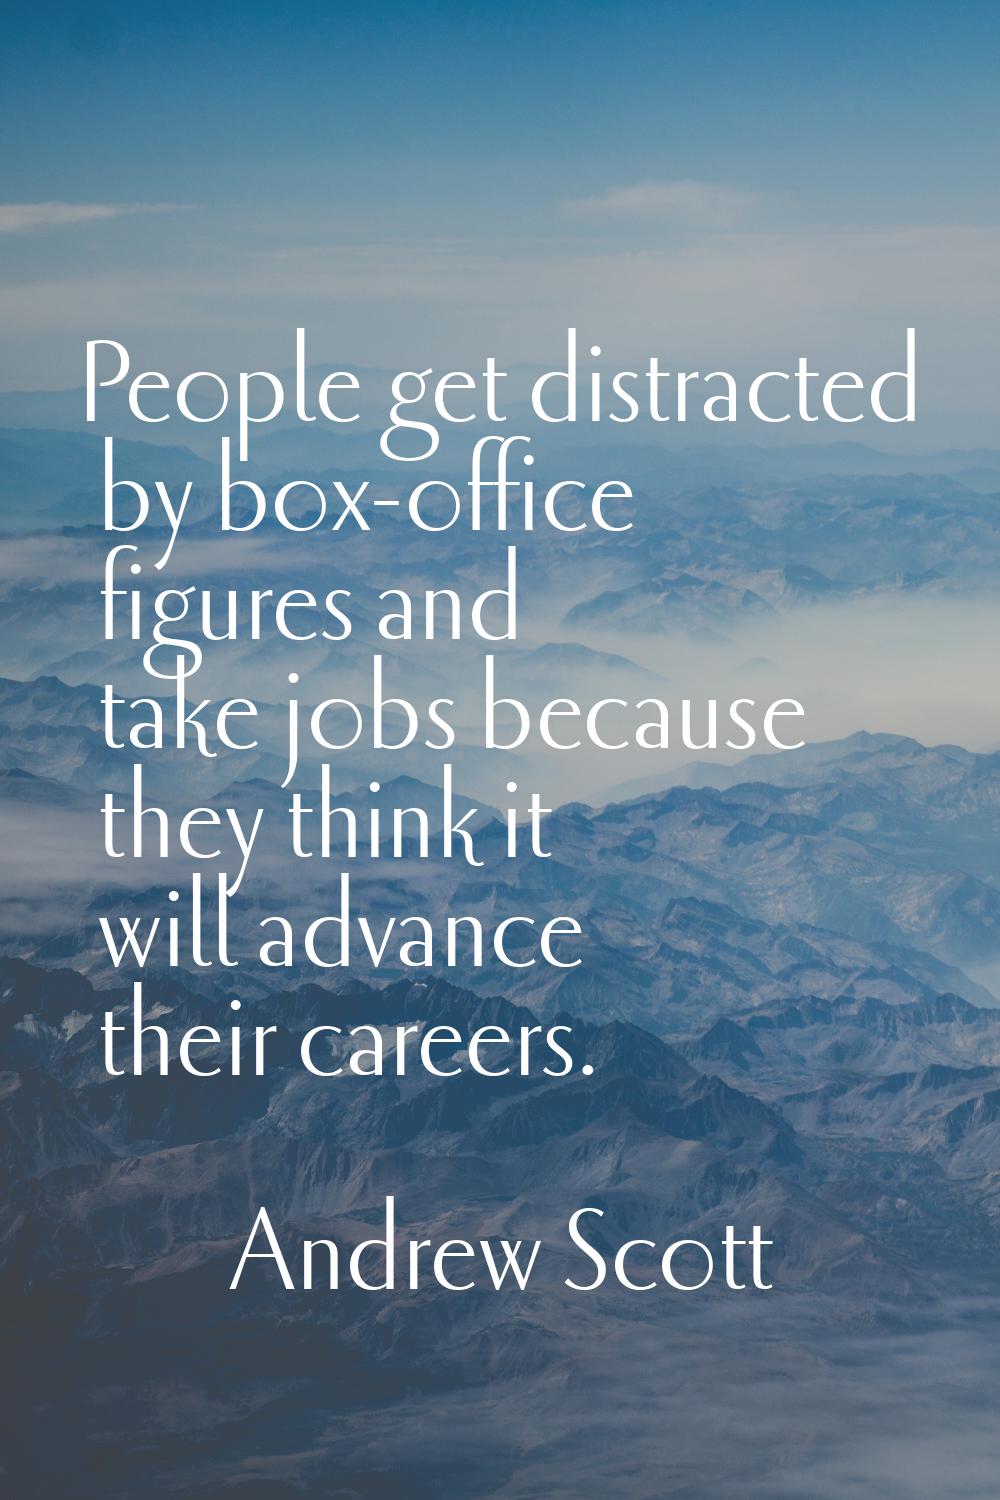 People get distracted by box-office figures and take jobs because they think it will advance their 